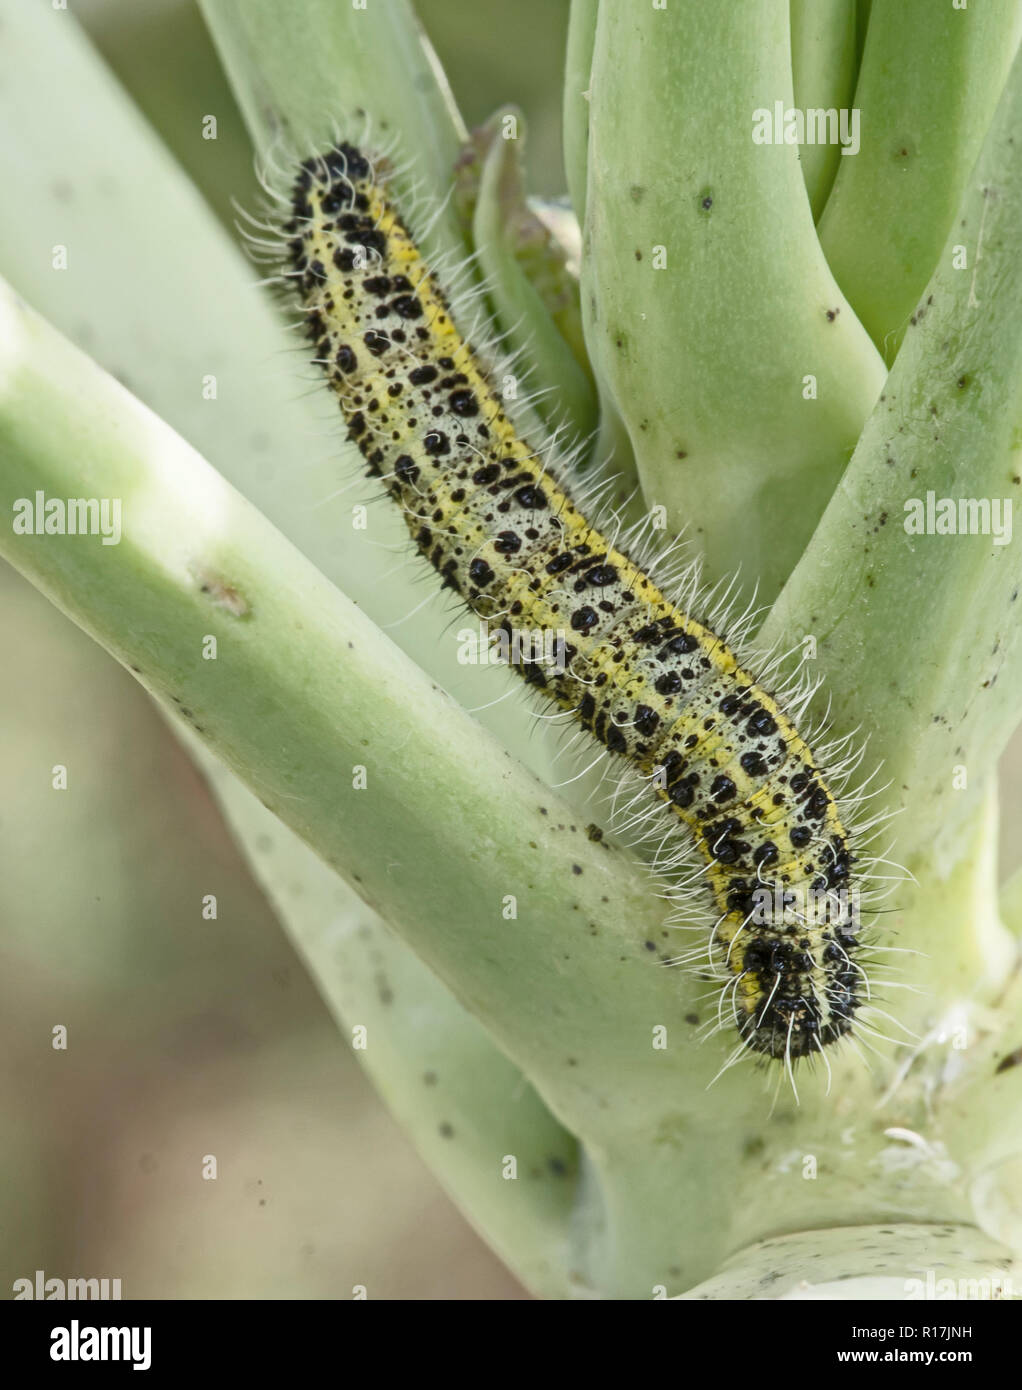 Caterpillar larva of the cabbage white butterfly Pieris brassicae, eating the leaves of a cabbage. Unseasonal climate, weather - photo November 2018. Stock Photo